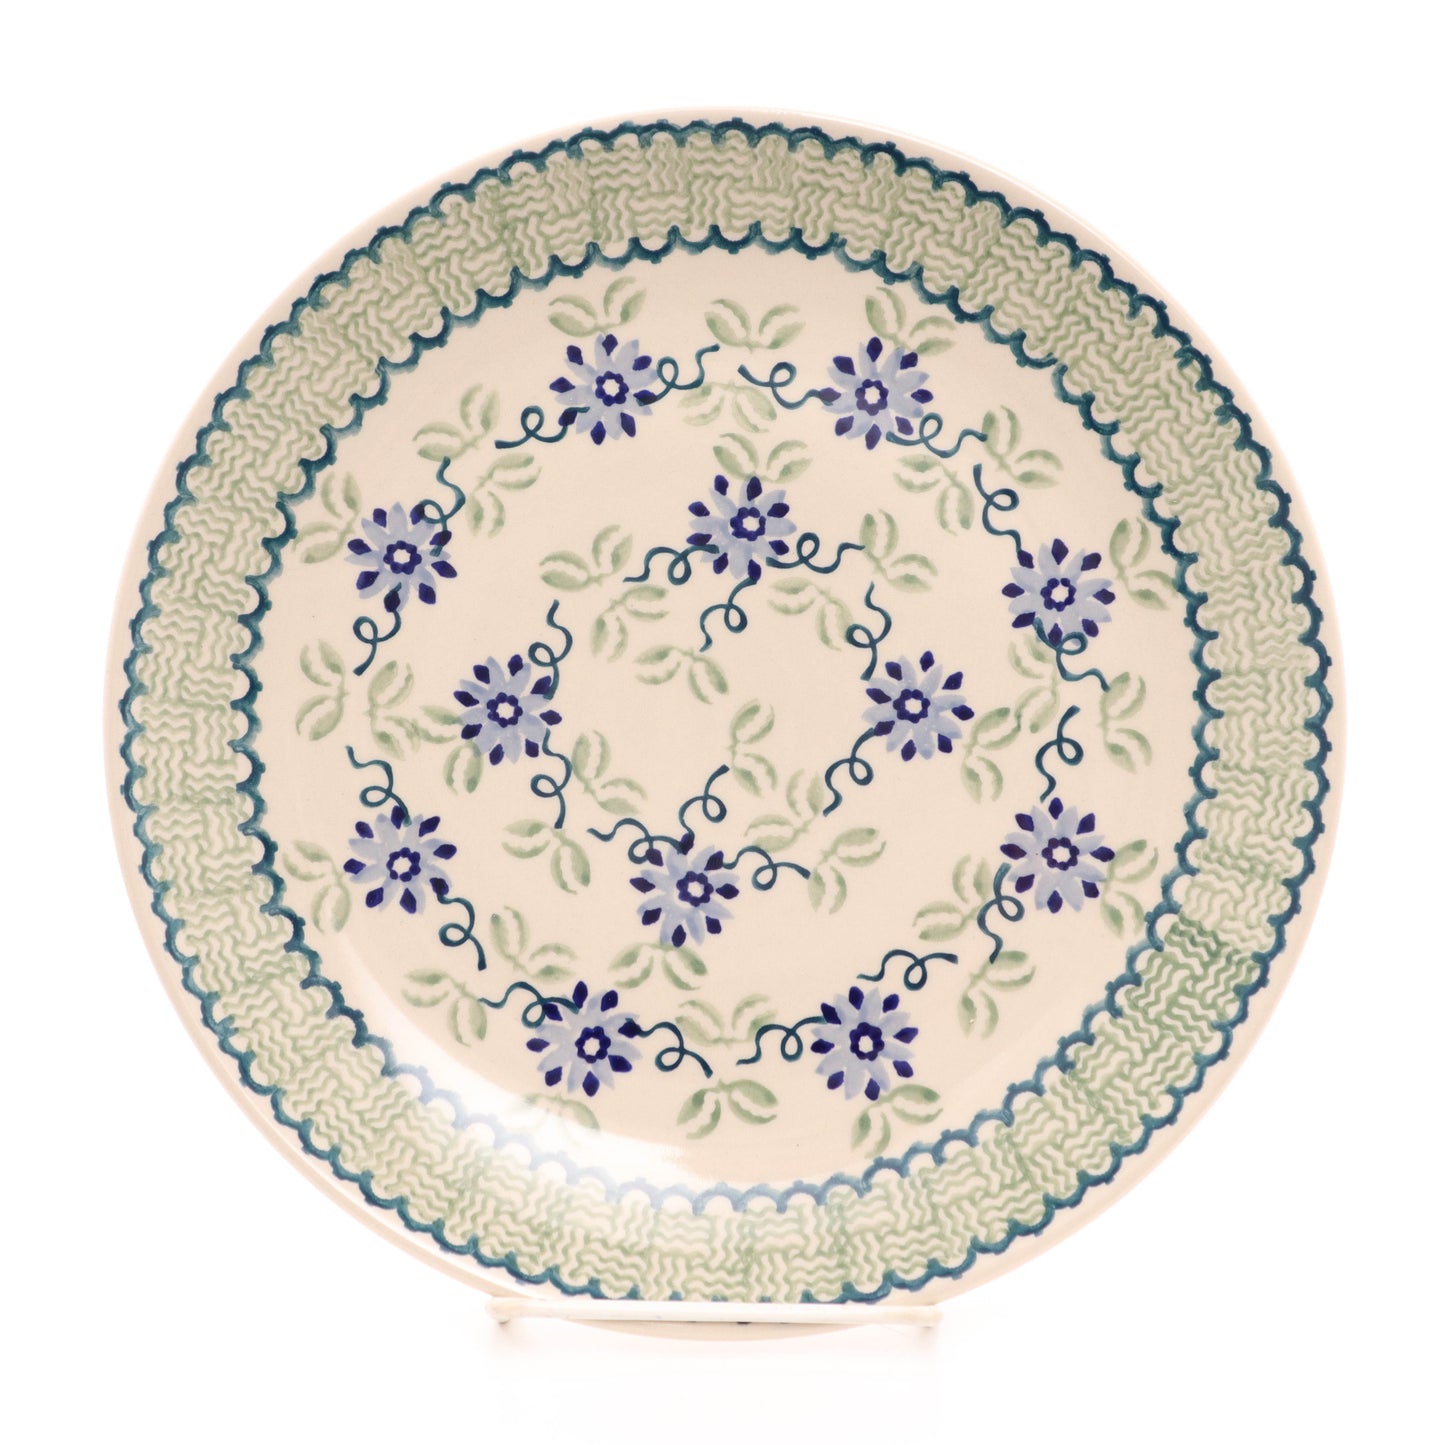 10" Dinner Plate.  Pattern: Country Basket